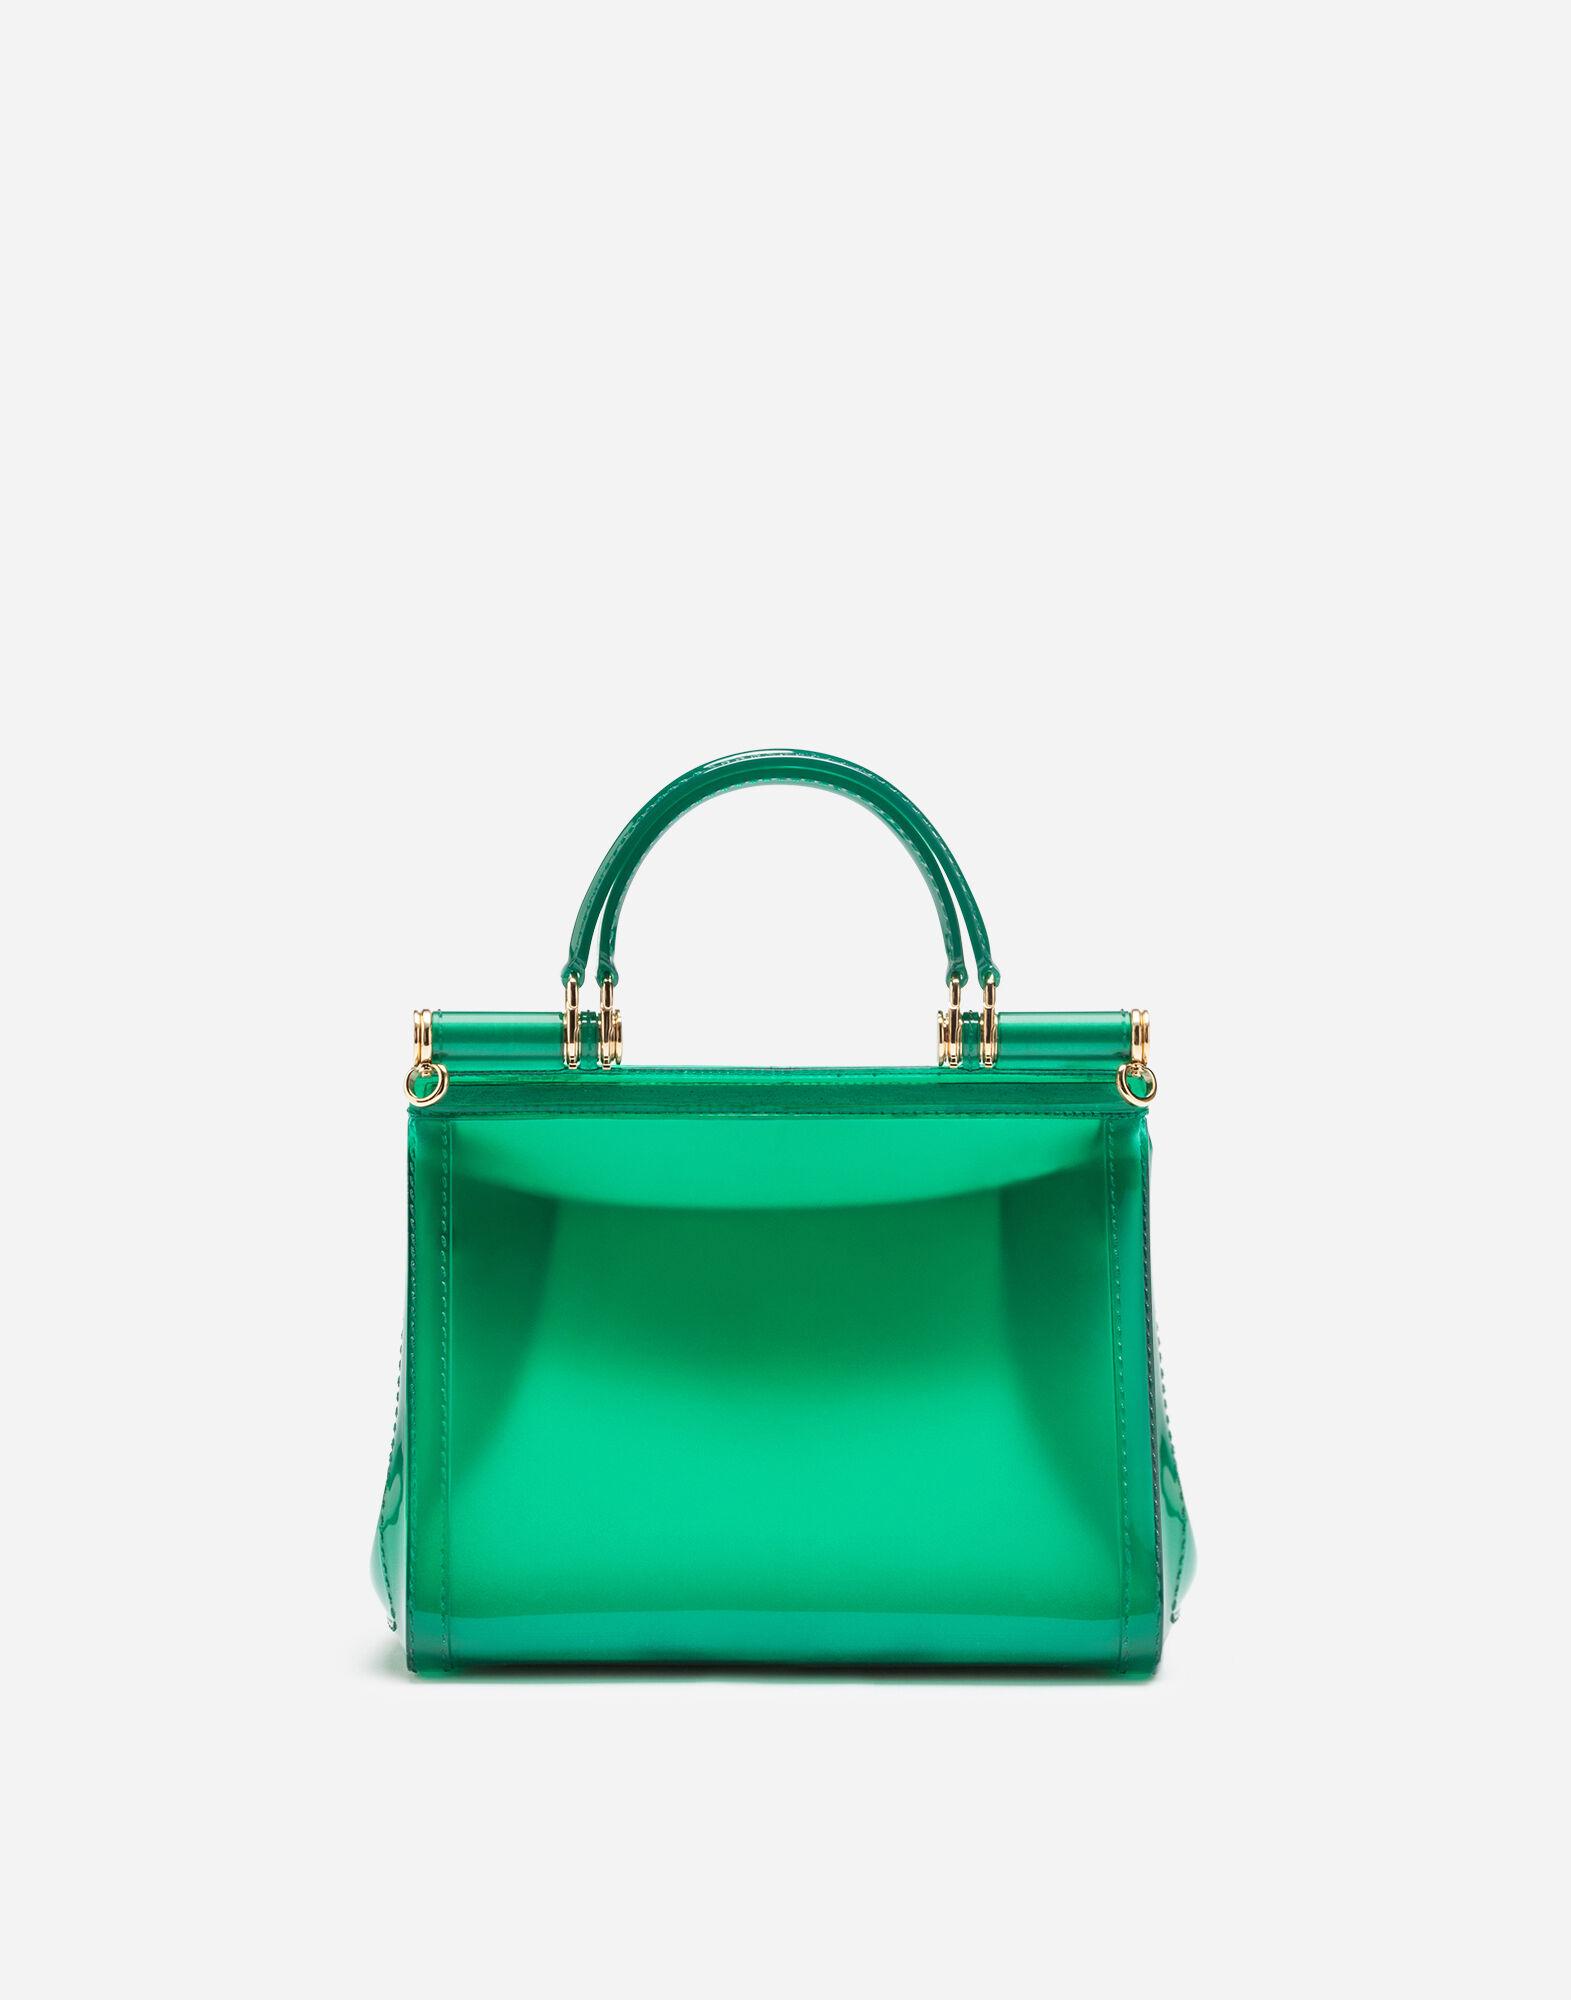 Dolce & Gabbana Leather Sicily Translucent Top Handle Bag in Emerald (Green)  | Lyst